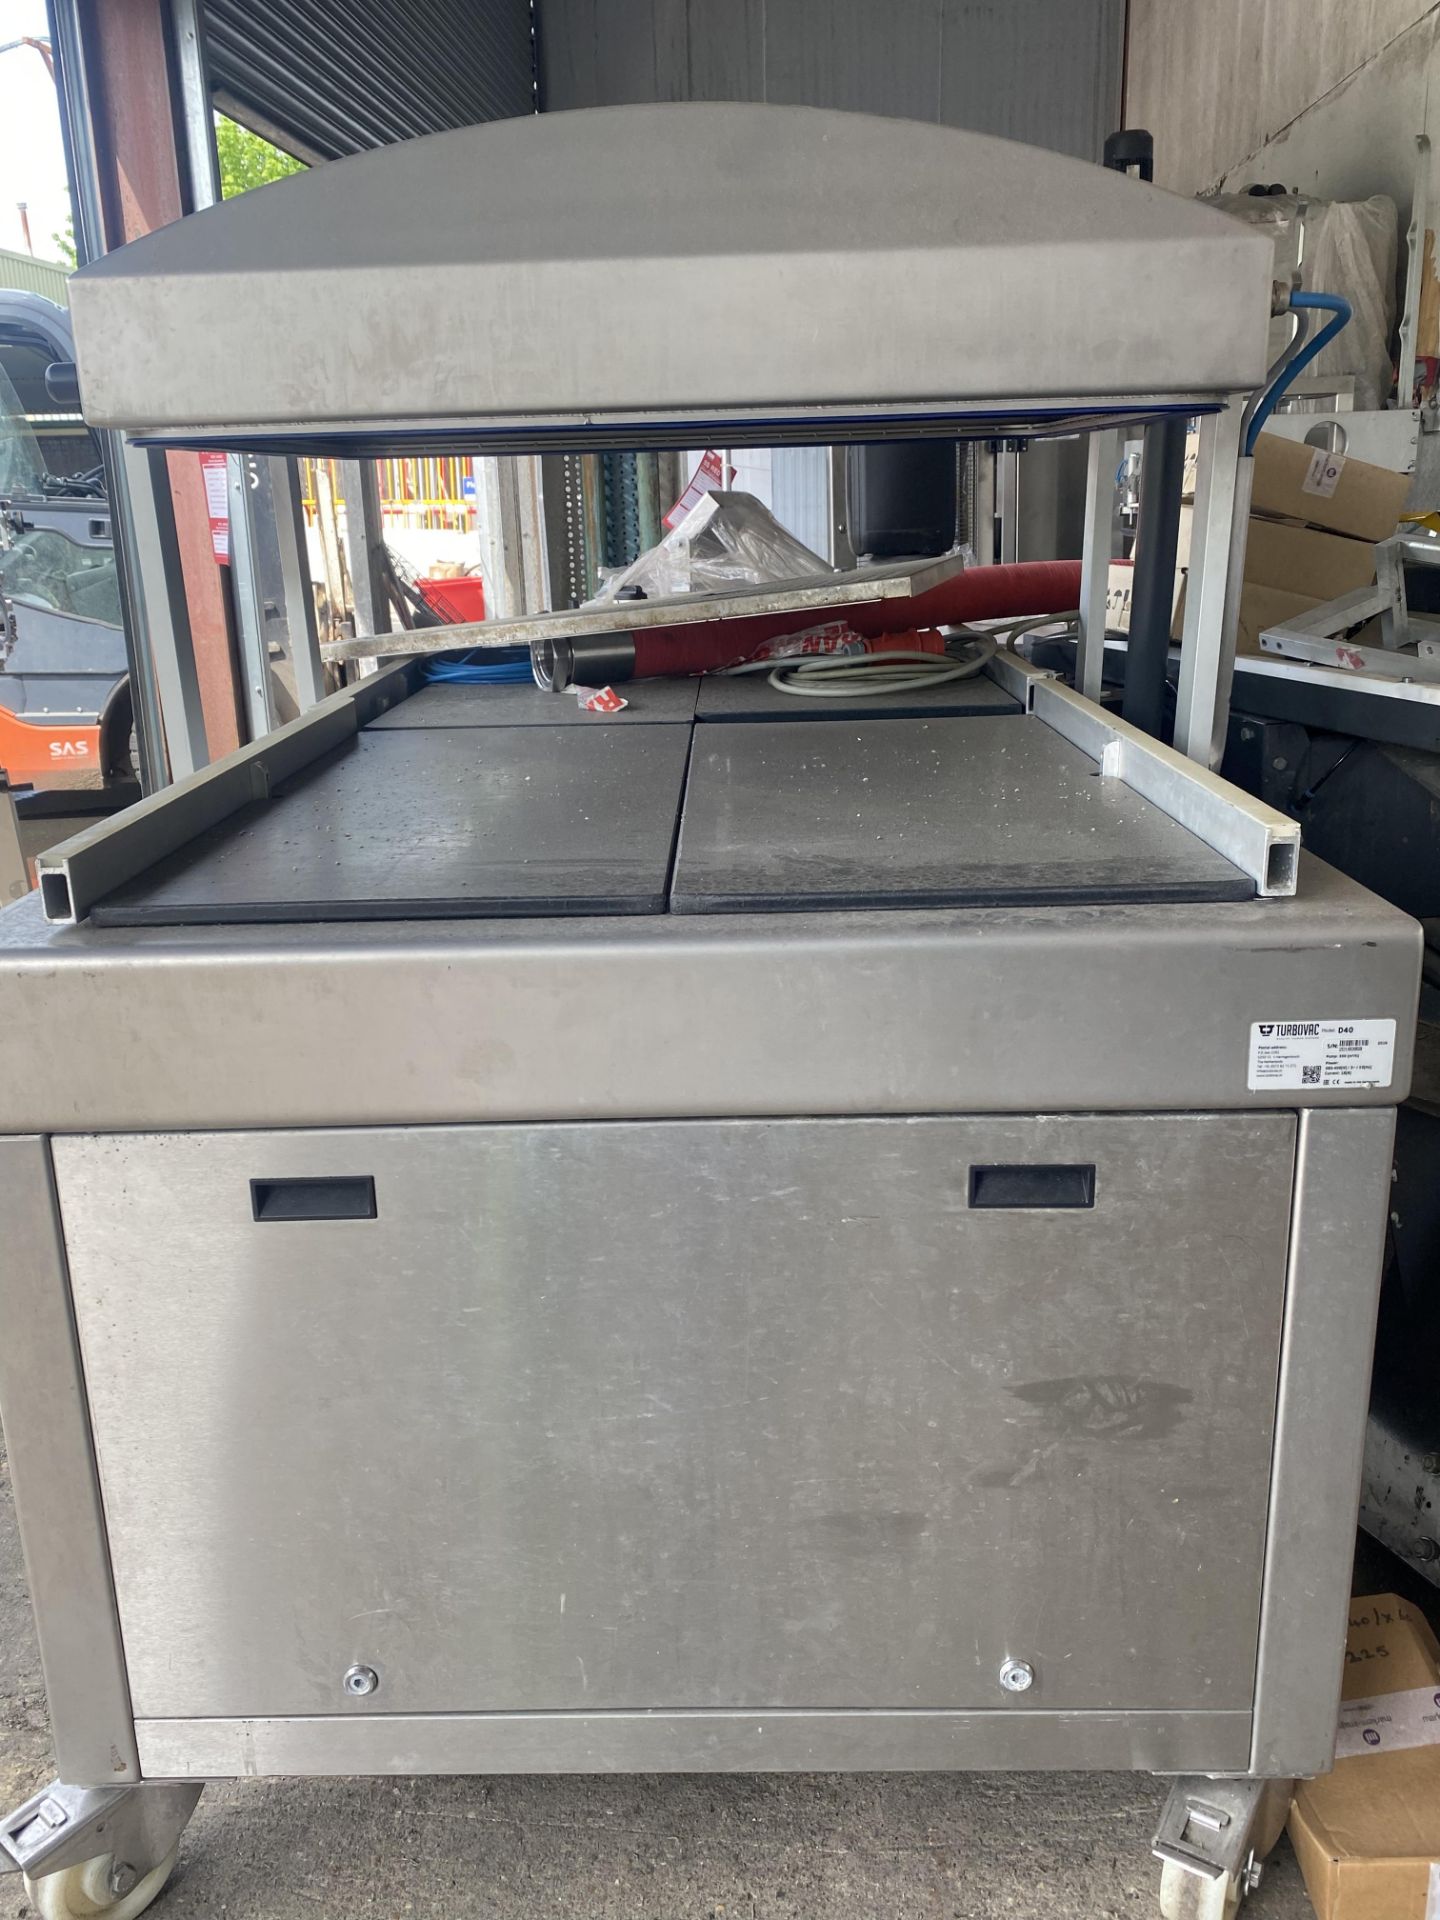 Turbovac vacuum packing machine , Model D40 , sn 20160958 , DOM 2016 (located in roller shutters) - Image 2 of 4